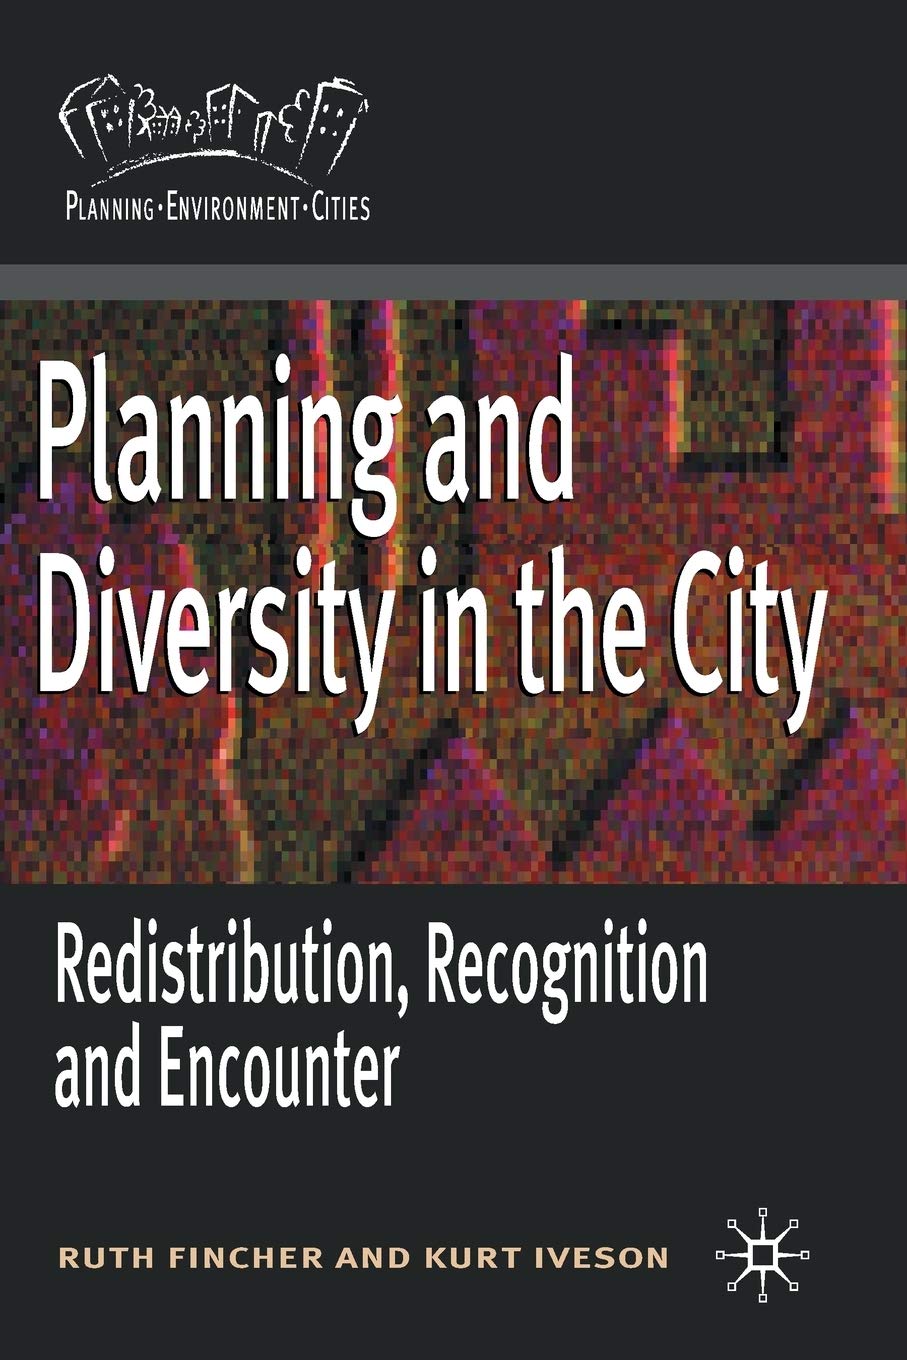 PLANNING AND DIVERSITY IN THE CITY - Virginia Book Company